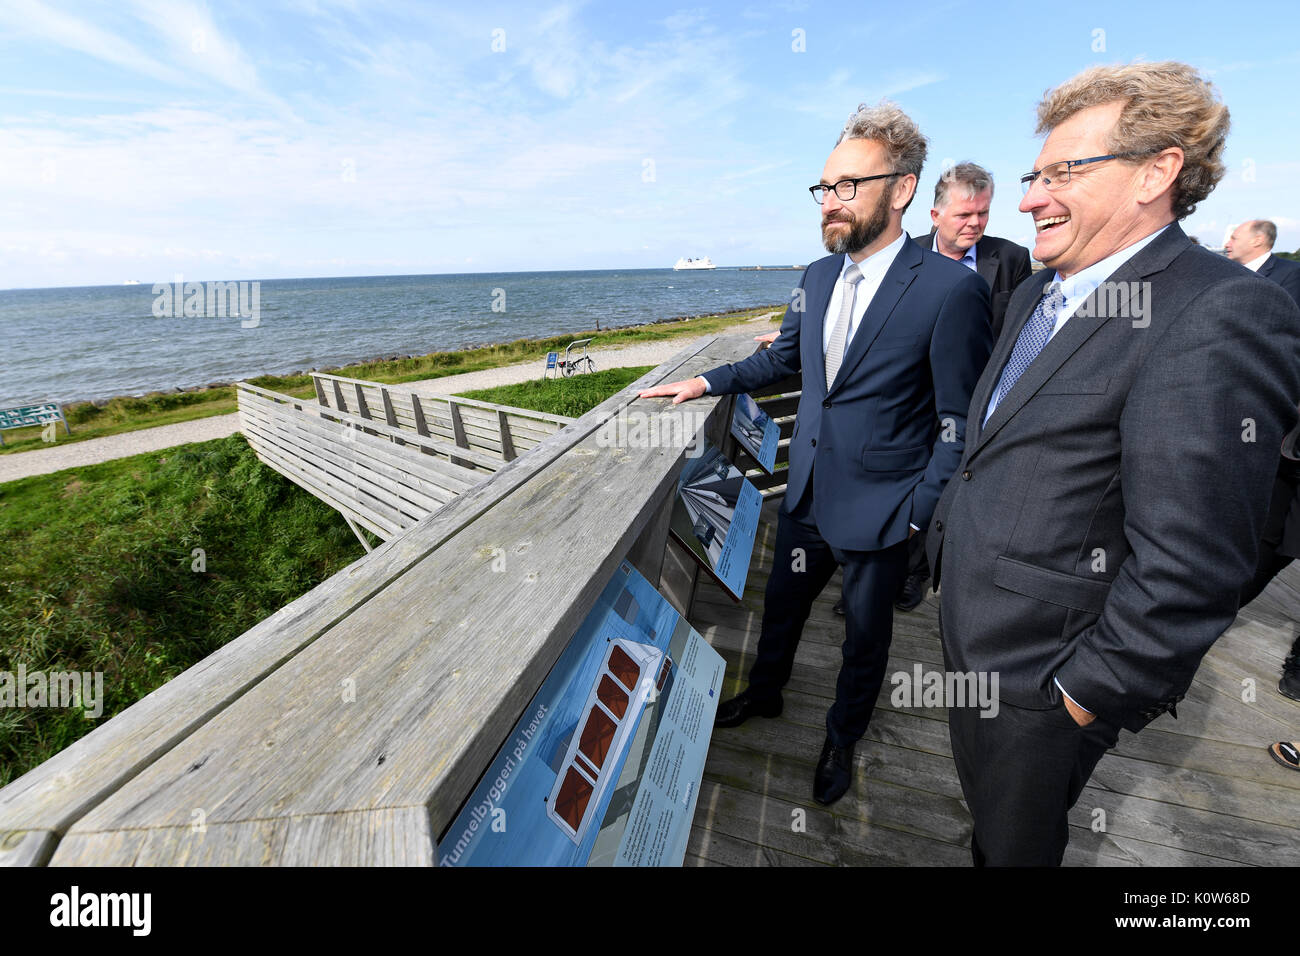 Denmark. 25th August, 2017. The Economy Minister of the state of Schleswig-Holstein, Bernd Buchholz (R), standing with his Danish counterpart Ole Birk Olesen (L) on a viewing platform of the proposed tunnel in Rødbyhavn, Denmark, 25 August 2017. The topic of the talks was the future Fehmarnbelt tunnel. Photo: Carsten Rehder/dpa/Alamy Live News Stock Photo